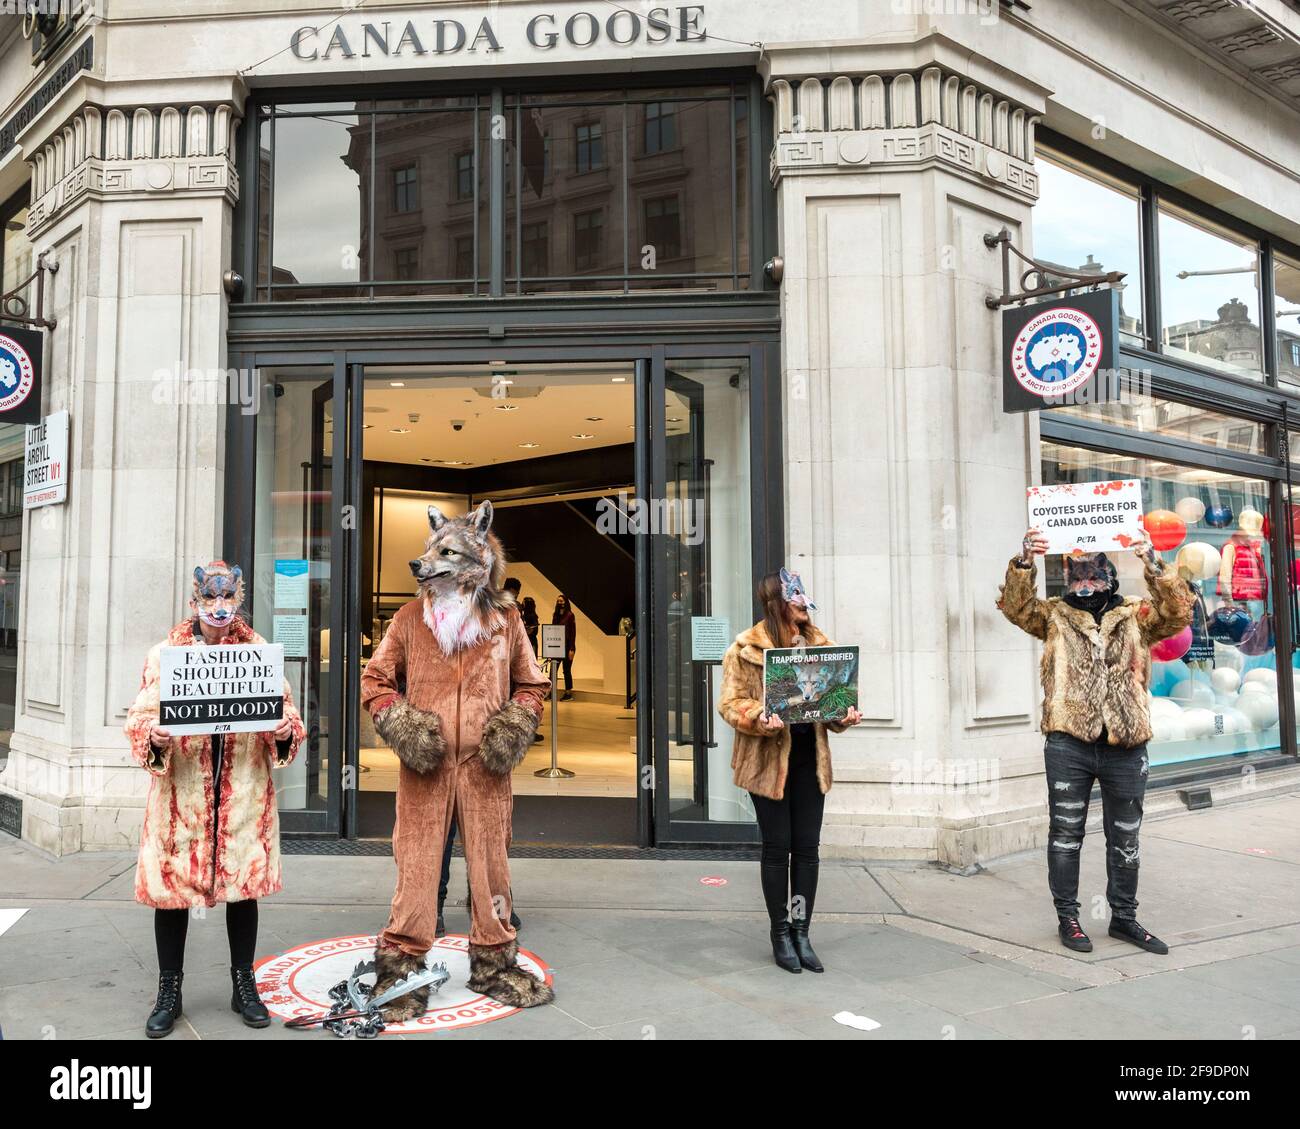 Activists seen holding placards expressing their opinion during the  demonstration.Animal cruelty activists Peta UK (People for the Ethical  Treatment of Animals) protest against the inhumane treatment of coyotes by  Canada goose, outside